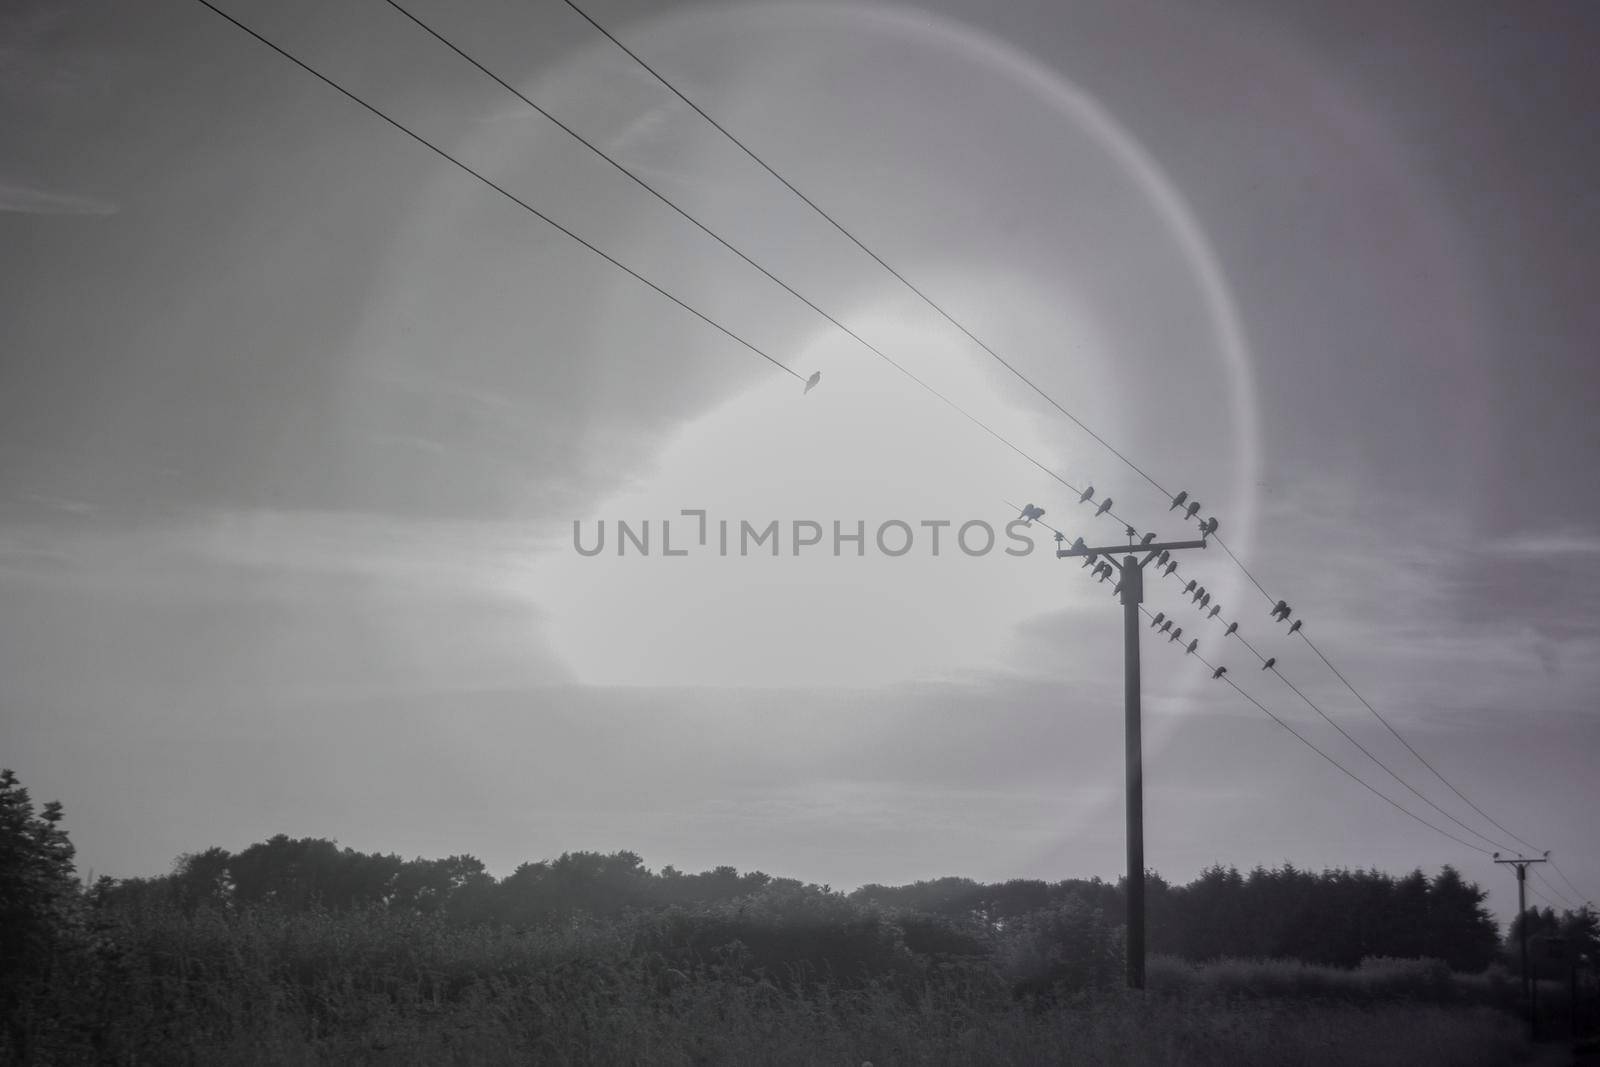 Monochrome, infrared photograph of electric wires with a flock of birds and sun in the background creating a halo effect.